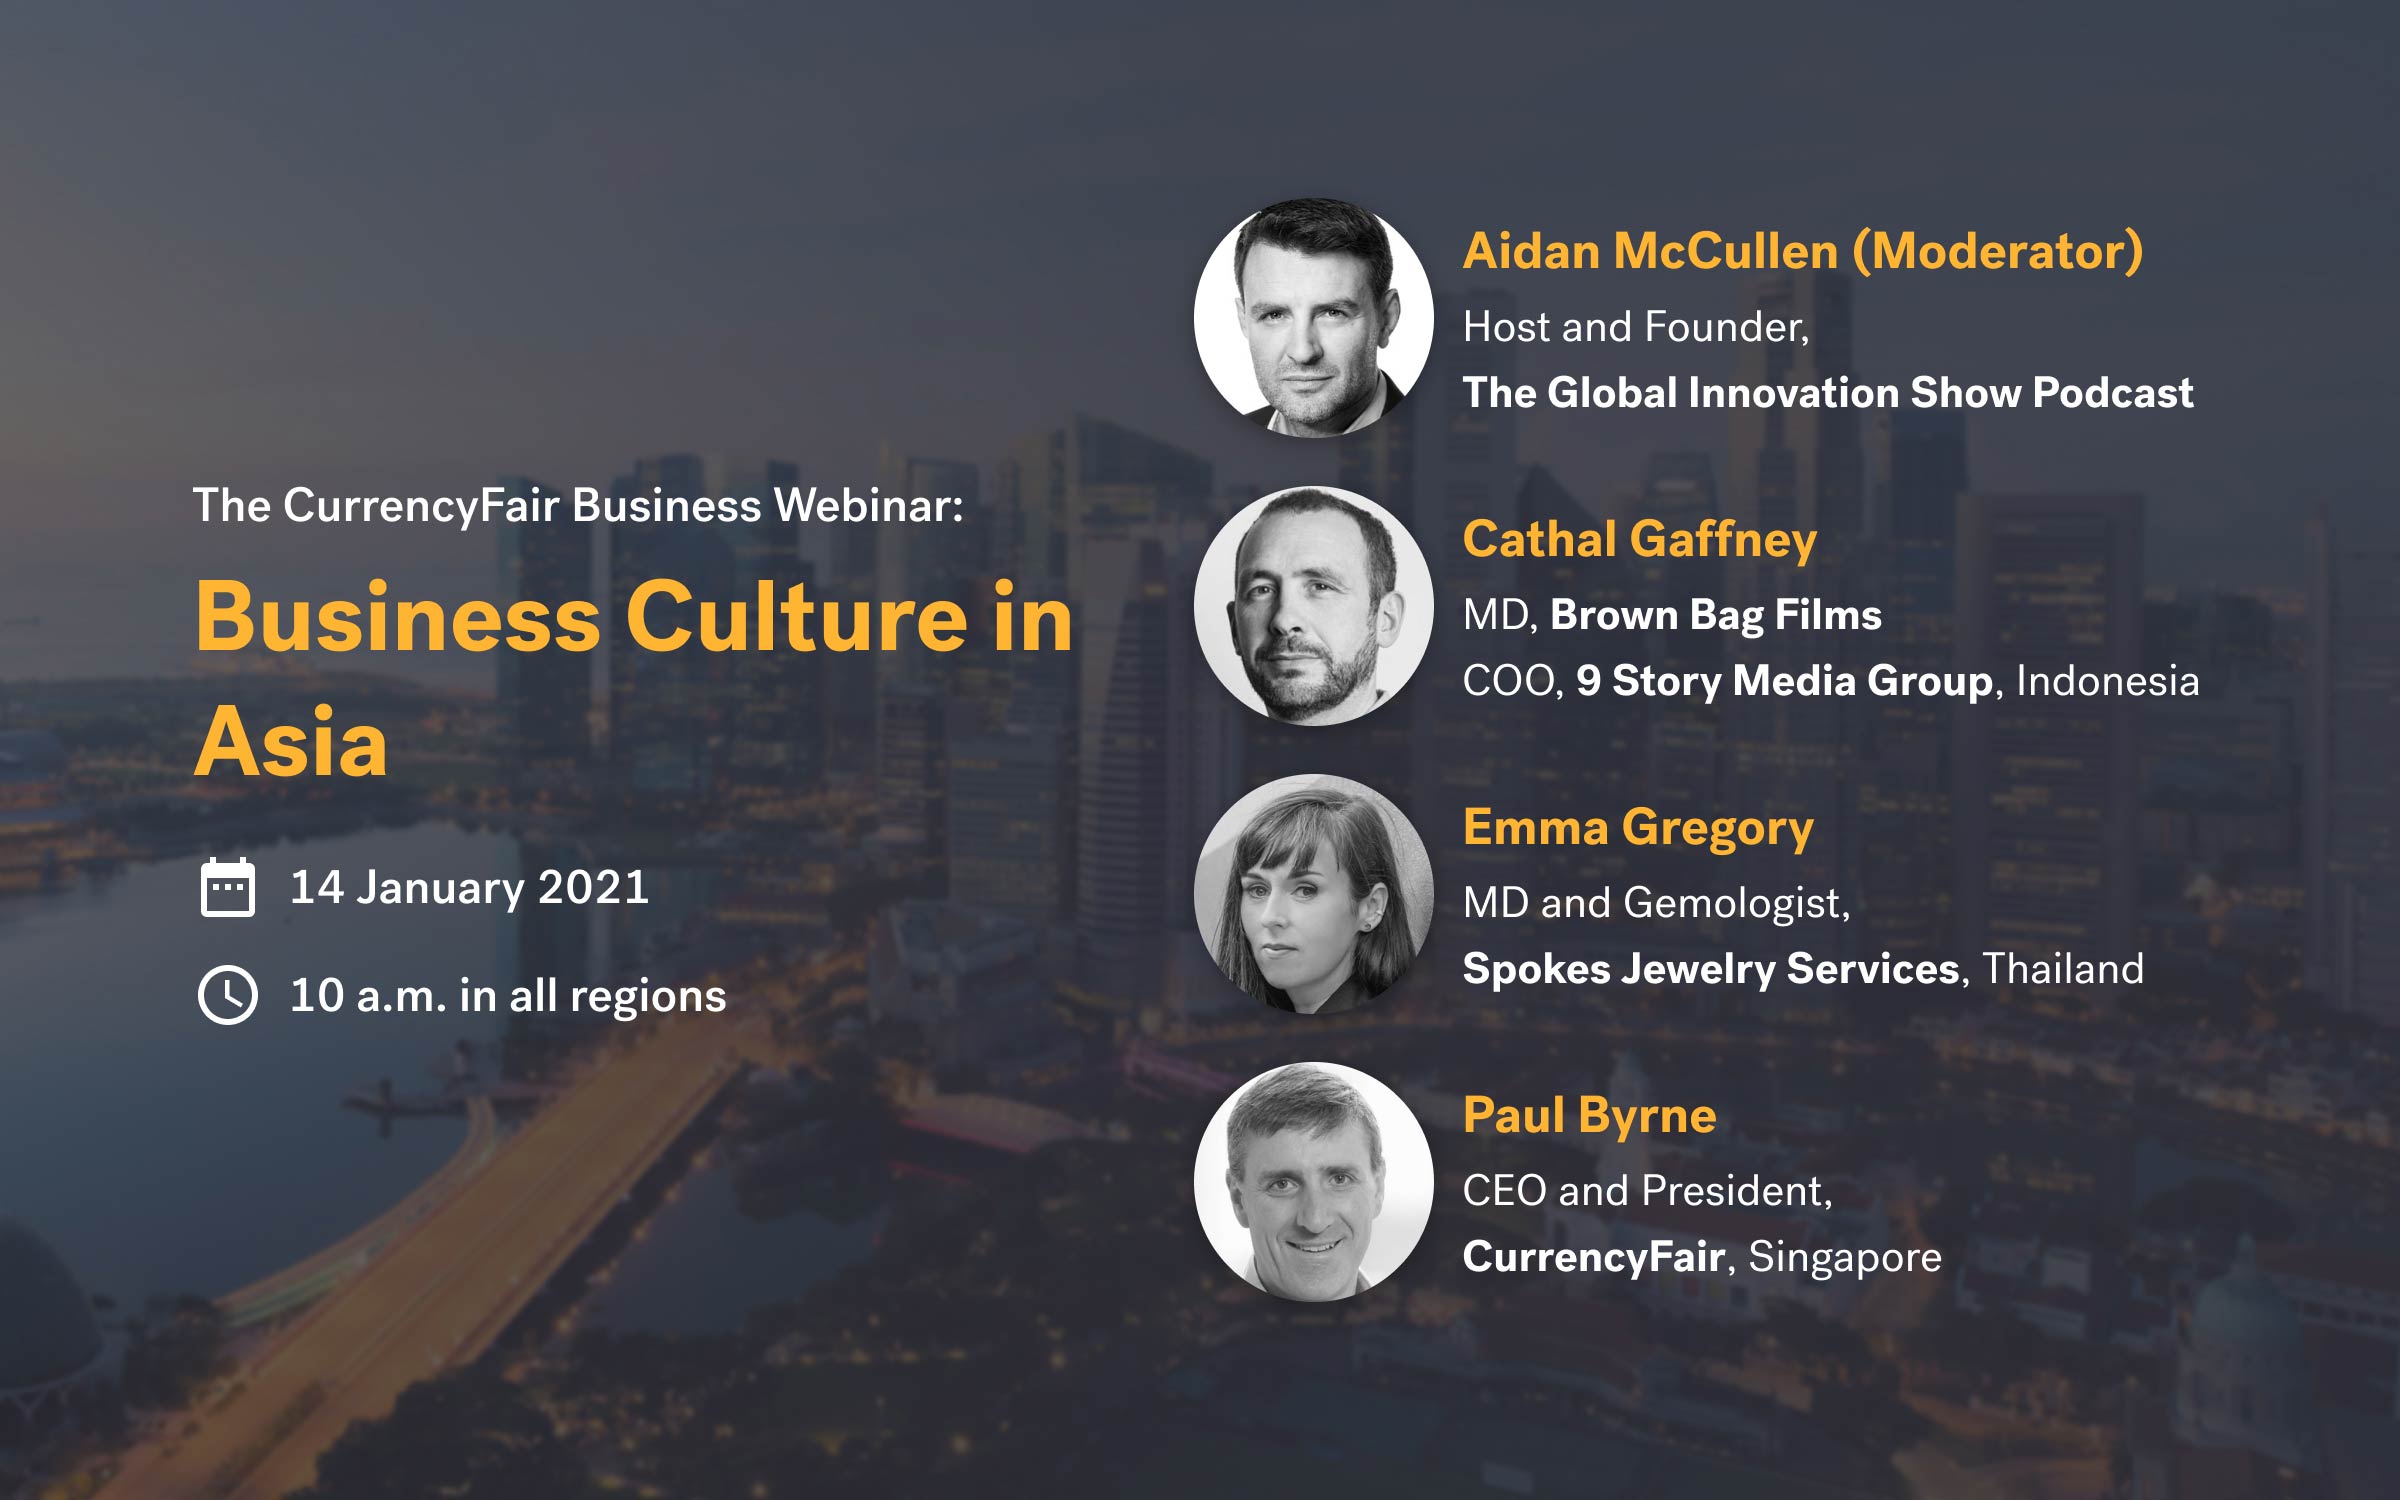 Business Culture in Asia panellist biographies